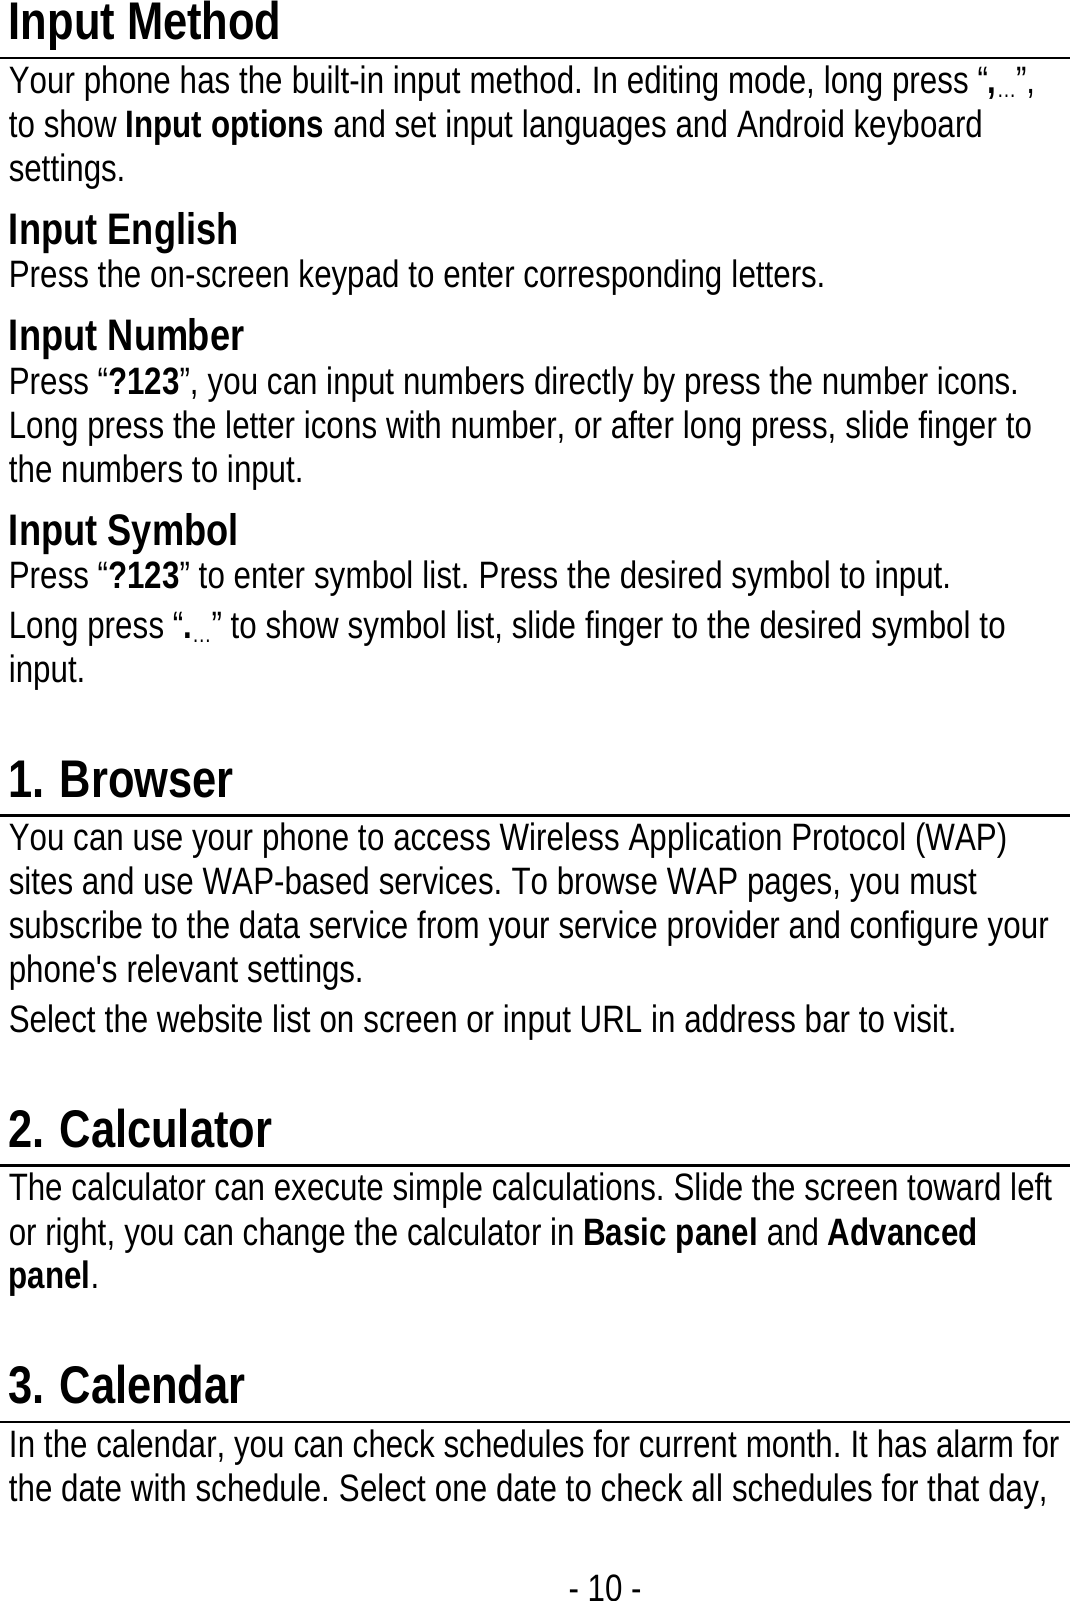  - 10 - Input Method Your phone has the built-in input method. In editing mode, long press “,…”, to show Input options and set input languages and Android keyboard settings. Input English Press the on-screen keypad to enter corresponding letters. Input Number Press “?123”, you can input numbers directly by press the number icons. Long press the letter icons with number, or after long press, slide finger to the numbers to input. Input Symbol Press “?123” to enter symbol list. Press the desired symbol to input. Long press “.…” to show symbol list, slide finger to the desired symbol to input.  1. Browser You can use your phone to access Wireless Application Protocol (WAP) sites and use WAP-based services. To browse WAP pages, you must subscribe to the data service from your service provider and configure your phone&apos;s relevant settings. Select the website list on screen or input URL in address bar to visit.  2. Calculator The calculator can execute simple calculations. Slide the screen toward left or right, you can change the calculator in Basic panel and Advanced panel.  3. Calendar In the calendar, you can check schedules for current month. It has alarm for the date with schedule. Select one date to check all schedules for that day, 